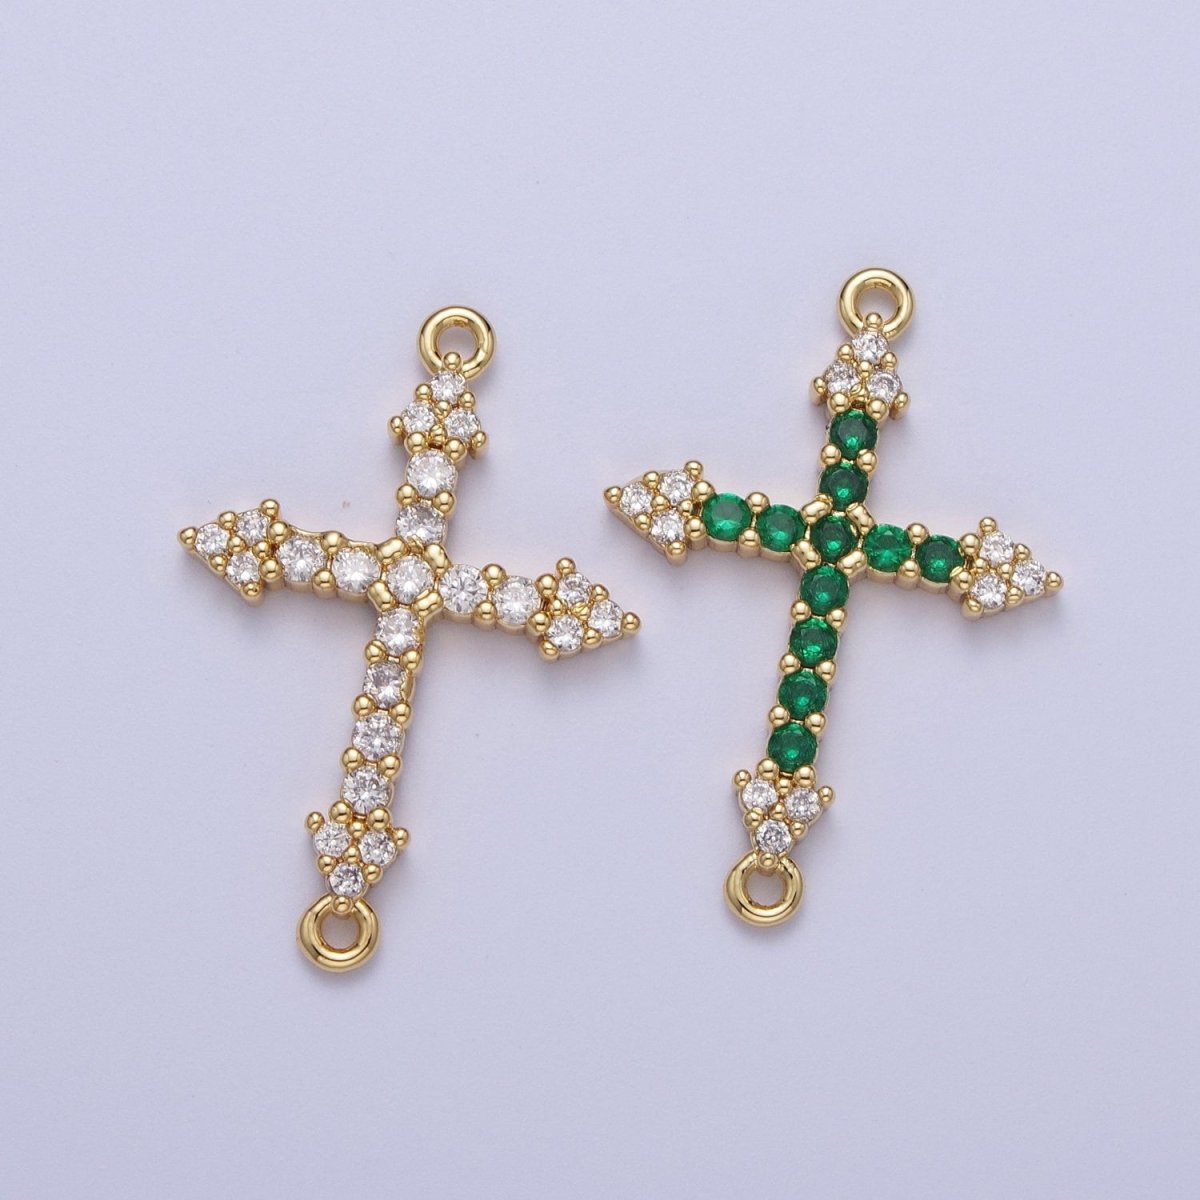 Micro Paved CZ Gold Cross Charm Connector For Religious Rosary Jewelry Making Supply F-140 F-241 F-303 - DLUXCA